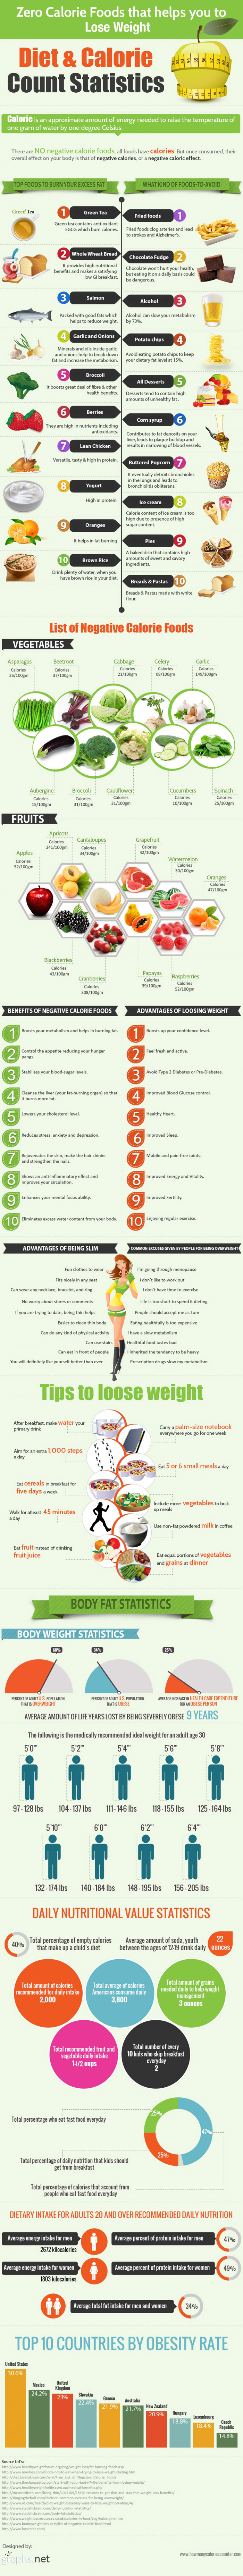 howtoloseweight_51dfbe0dc7189_w1500a